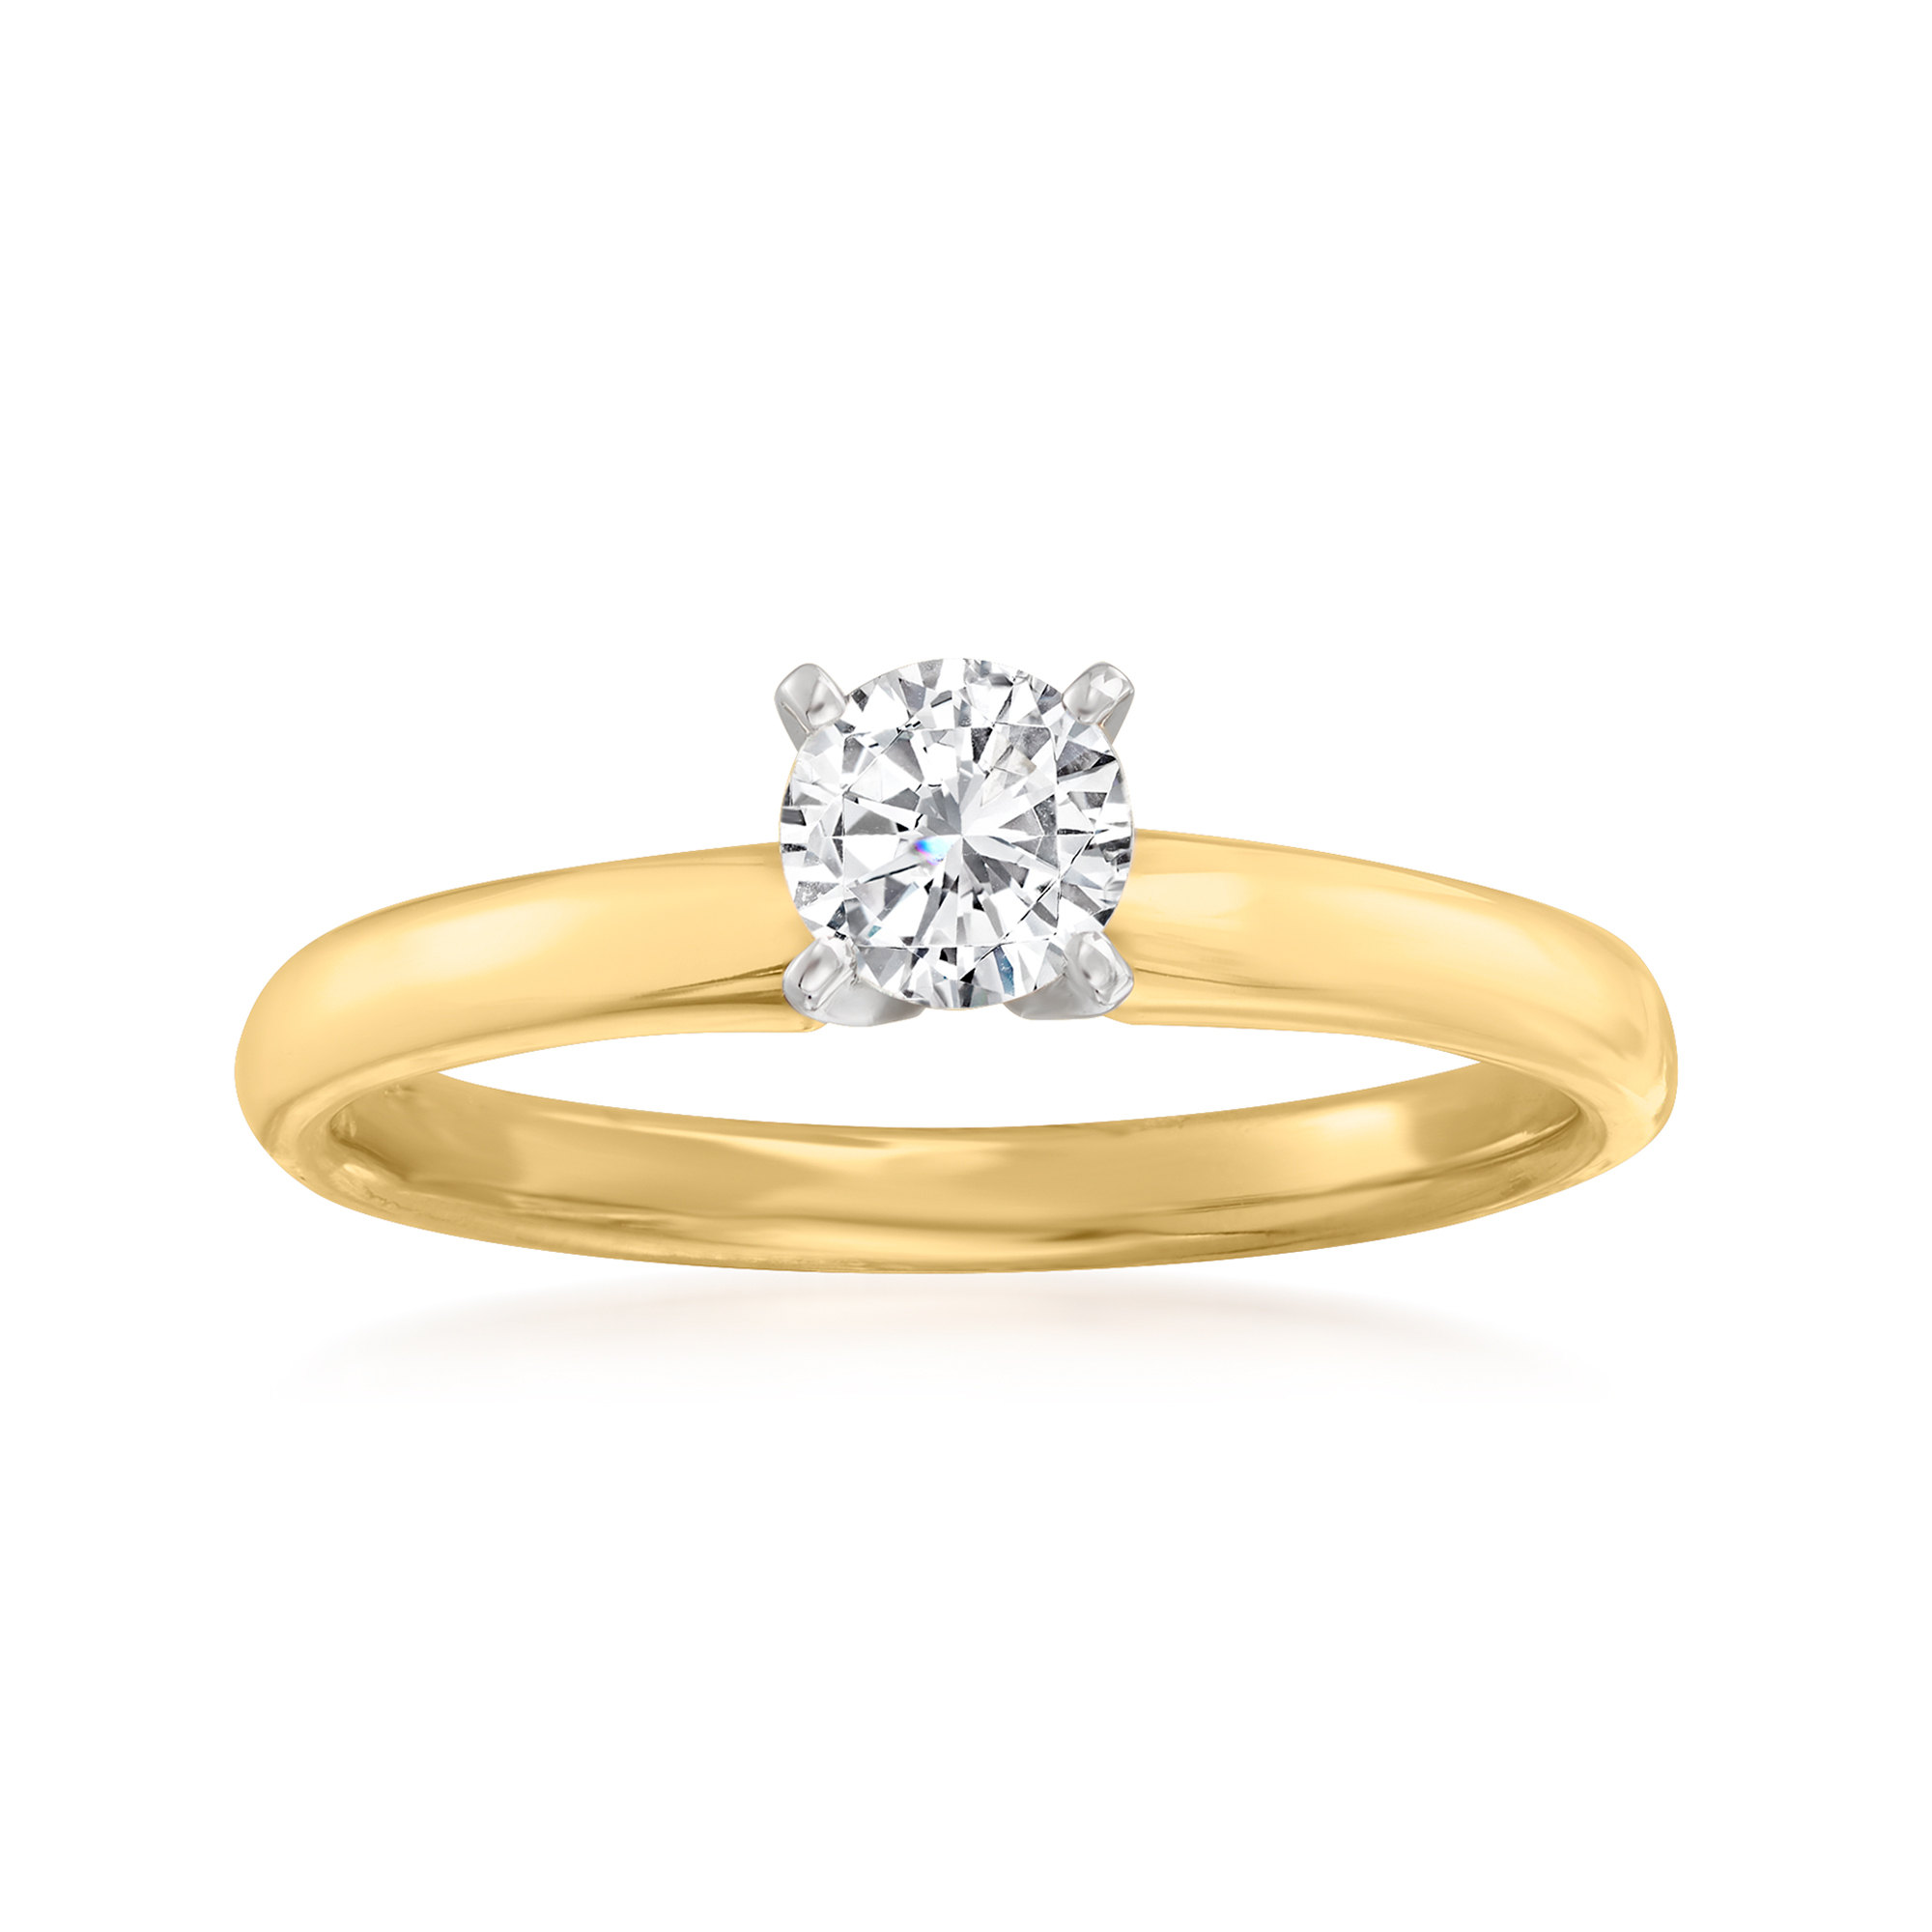 50 Carat Diamond Solitaire Ring in 14kt Yellow Gold | Ross-Simons